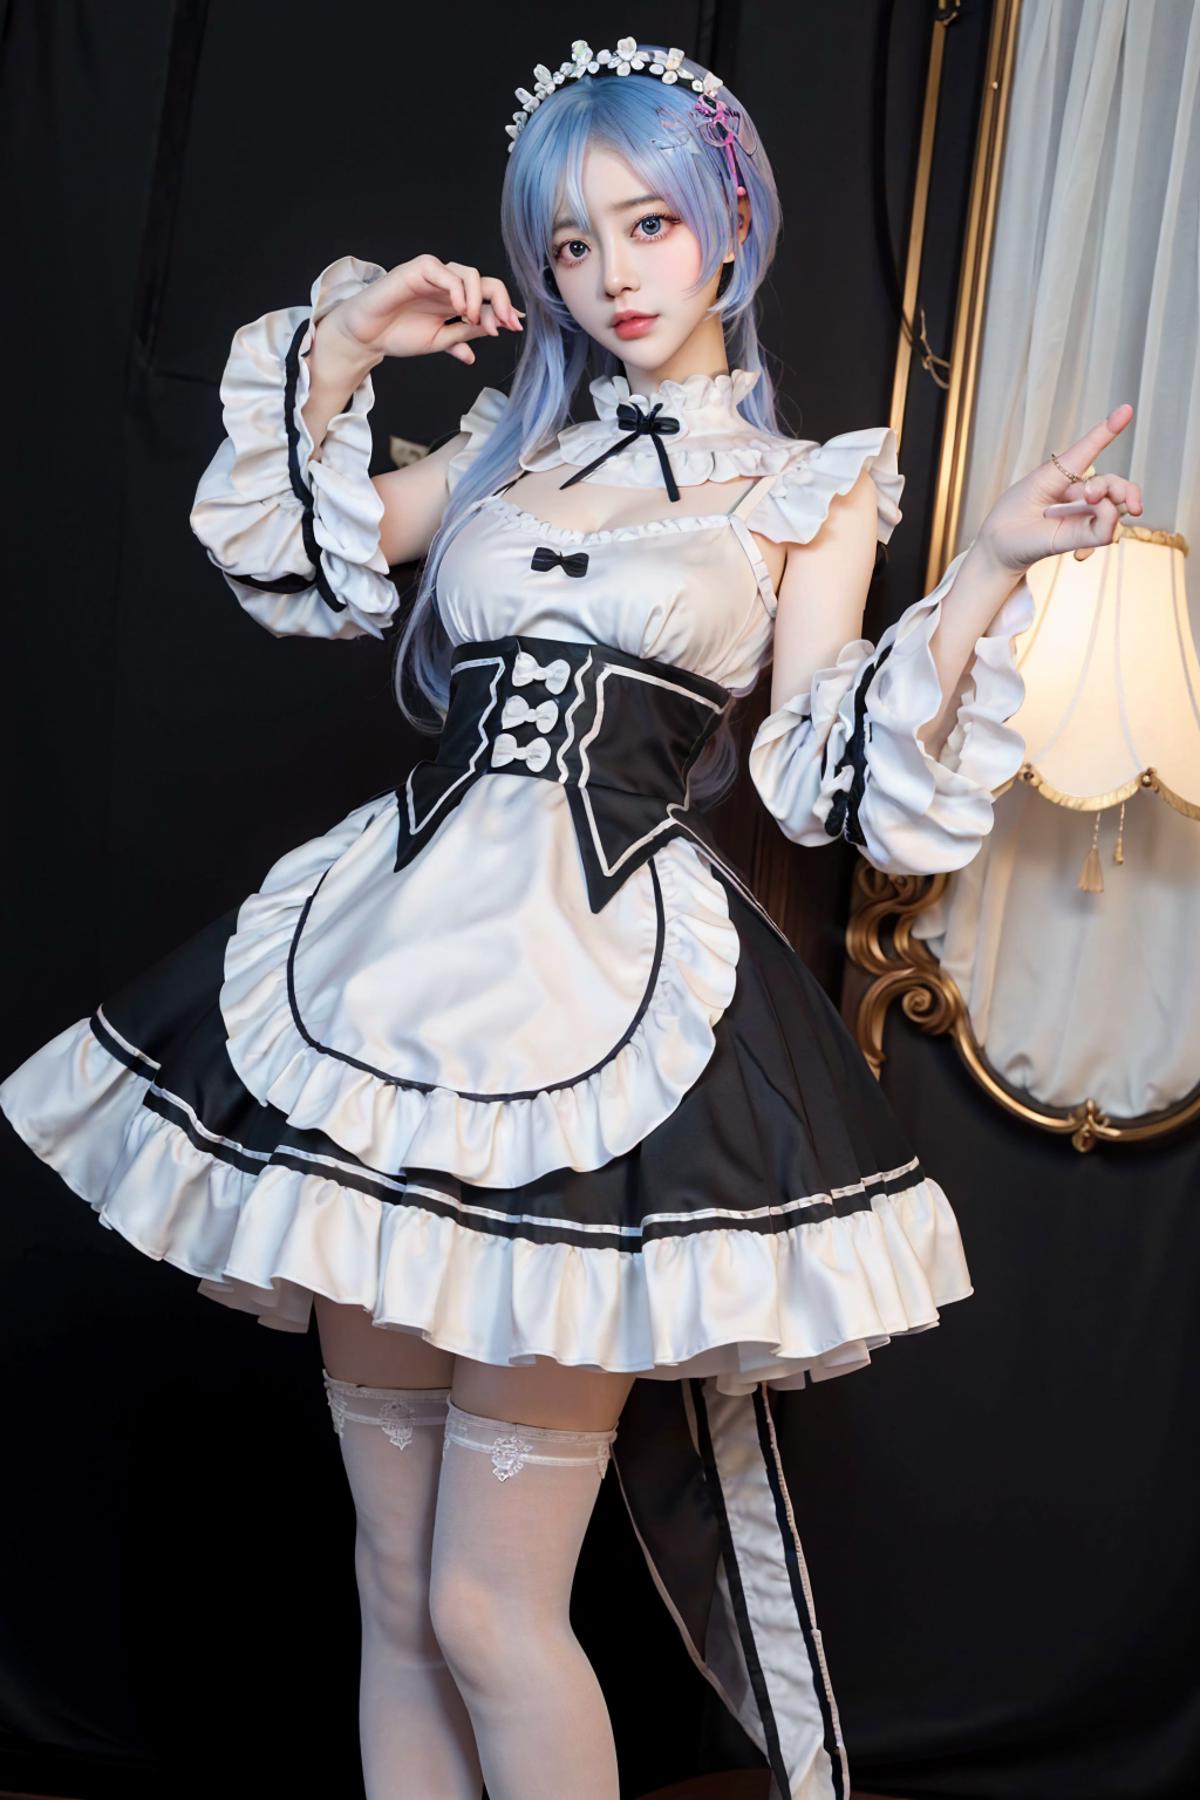 Rem/maid image by AIGC_StaR